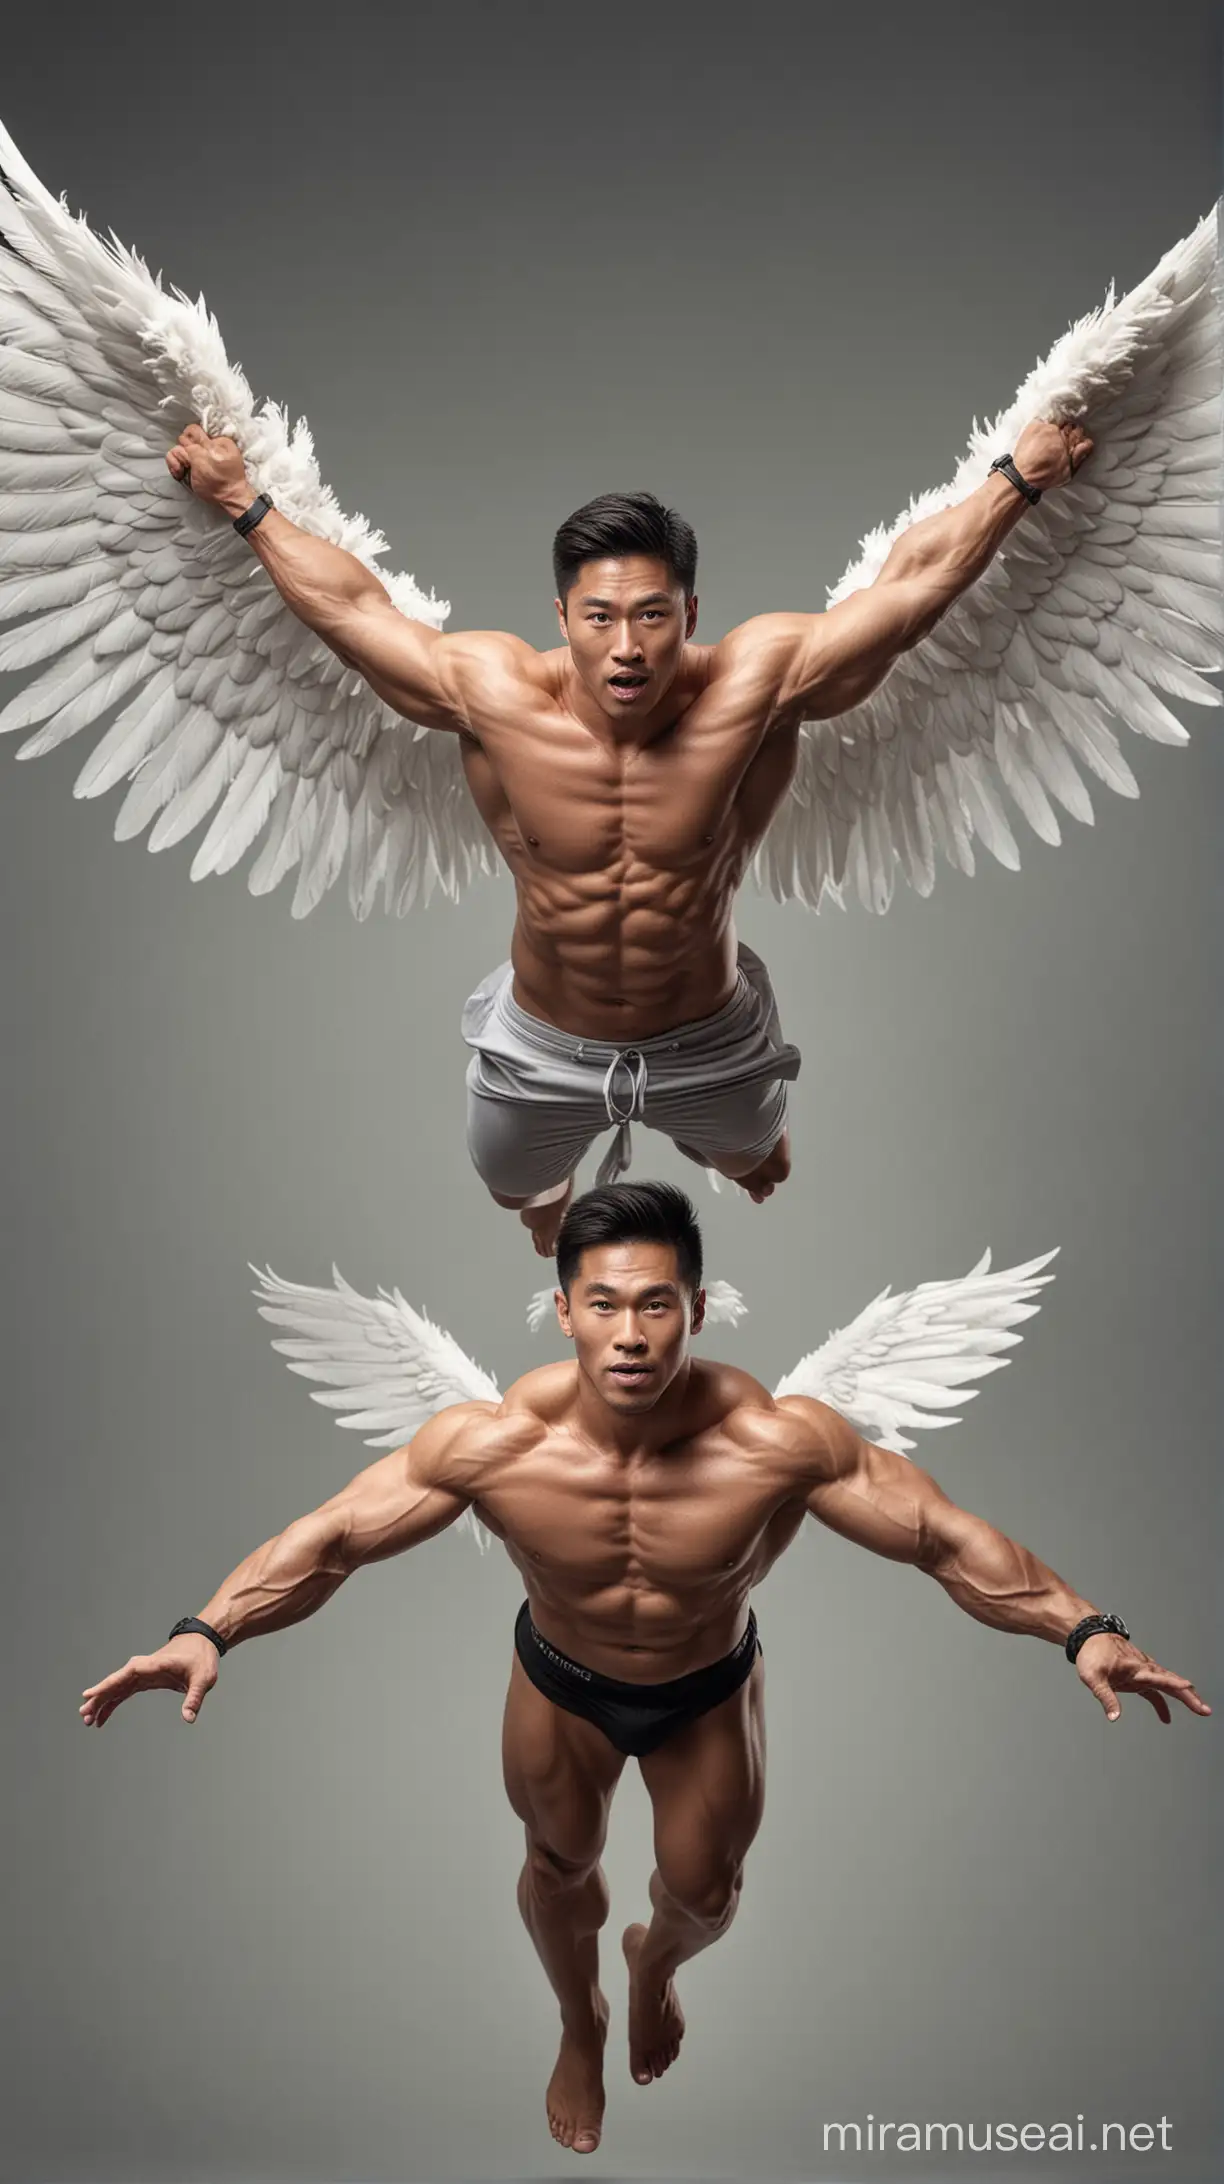 Asian Bodybuilder Soaring with Powerful Wings